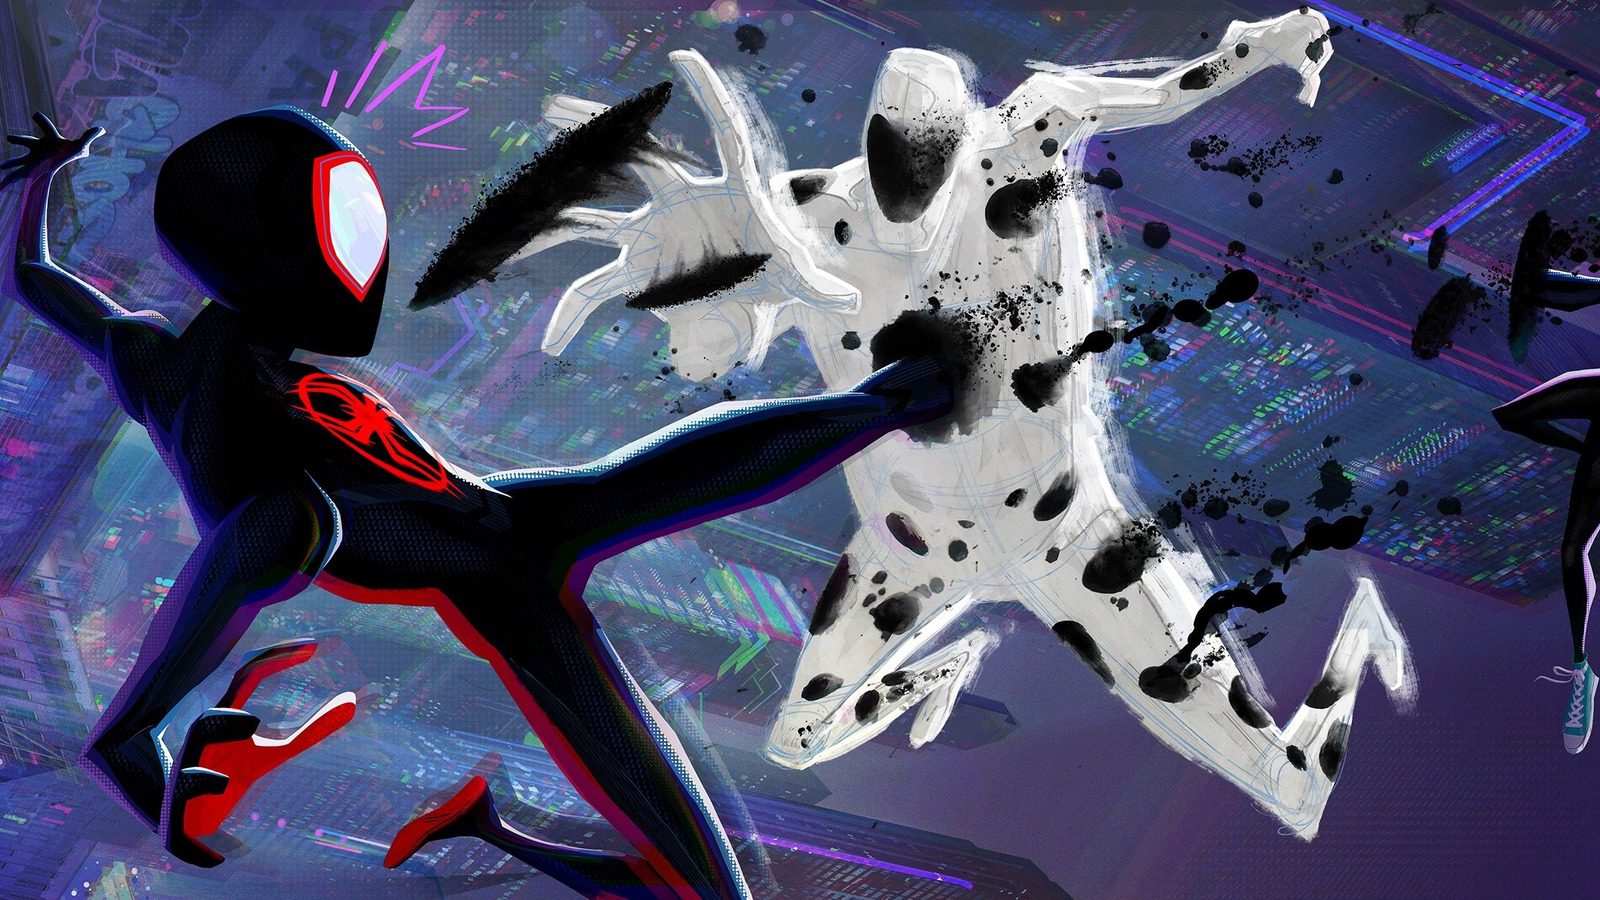 Across The Spider-Verse: The Spot Has His Own 'Deadpool'